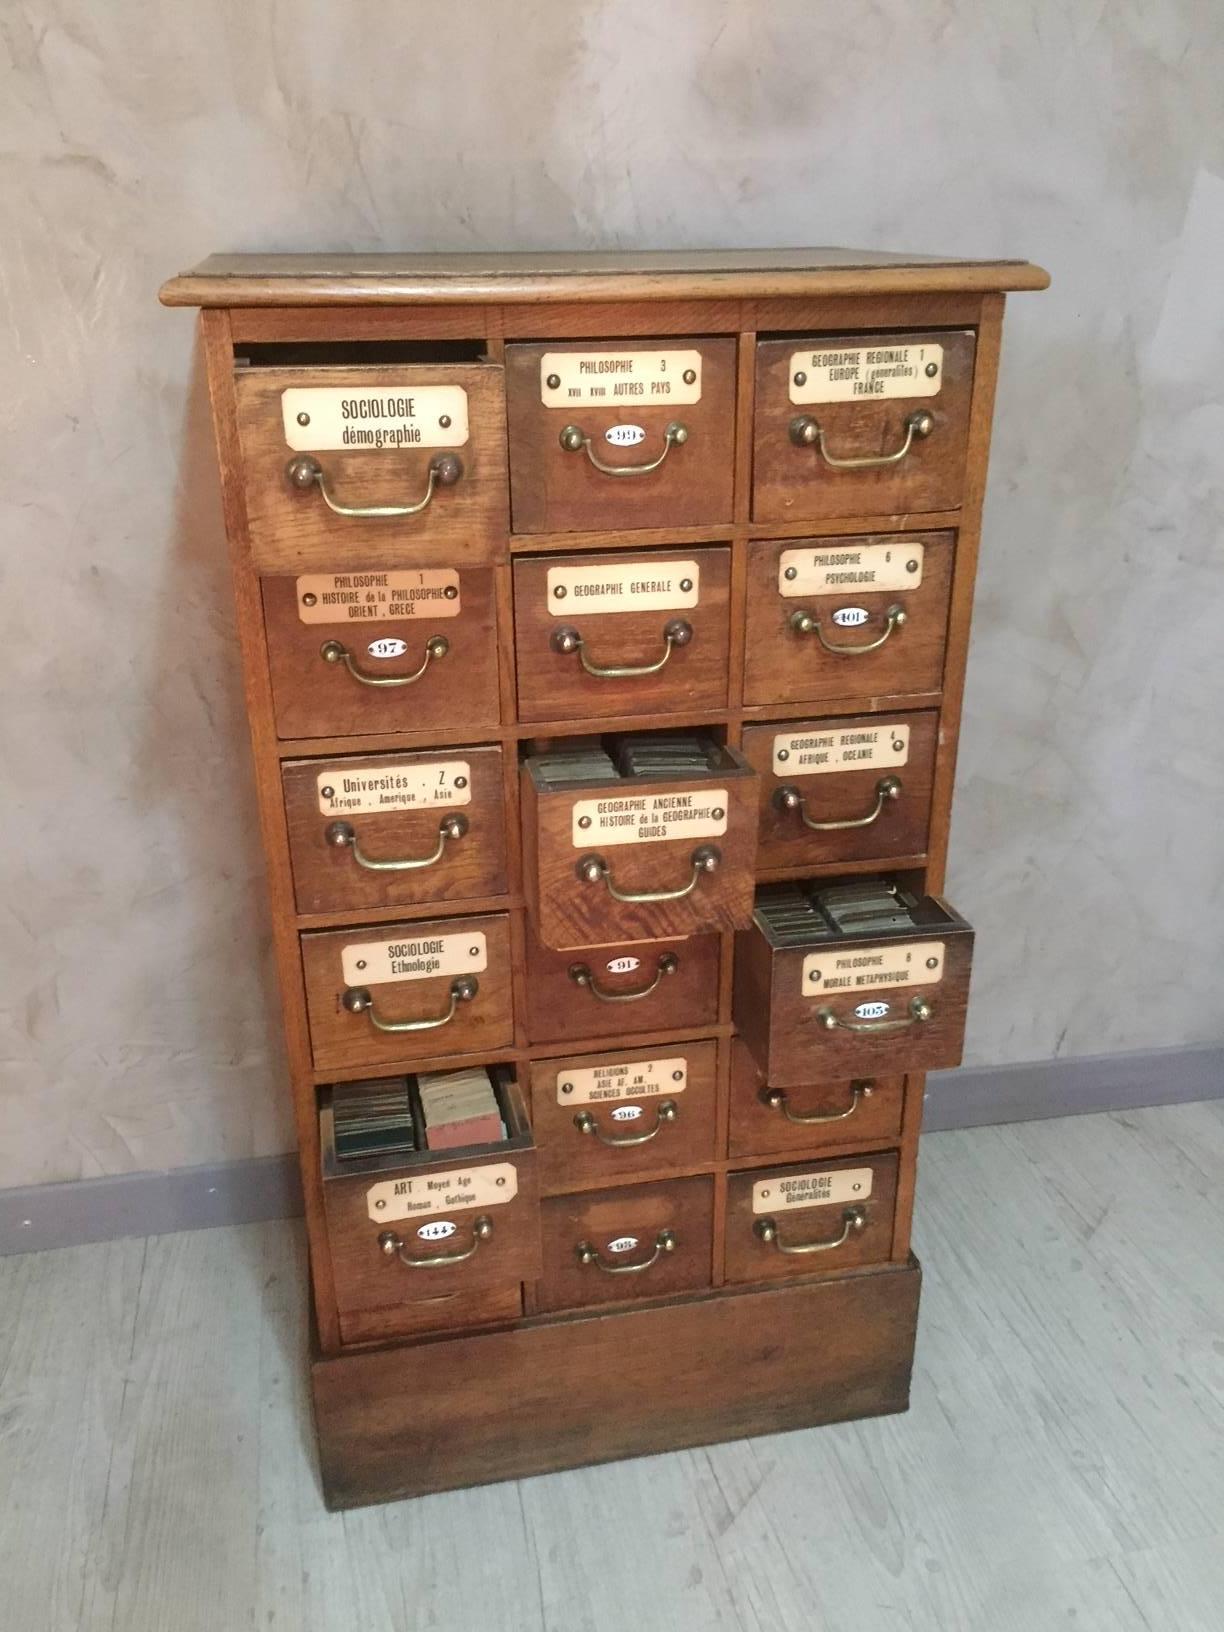 Very nice French oak University storage cabinet with French subjects labels. One label is missing. 18 drawers.
There are still notes in the drawers.
Original patina. Brass handles.
Some drawers has number badge.
The back is plywood.